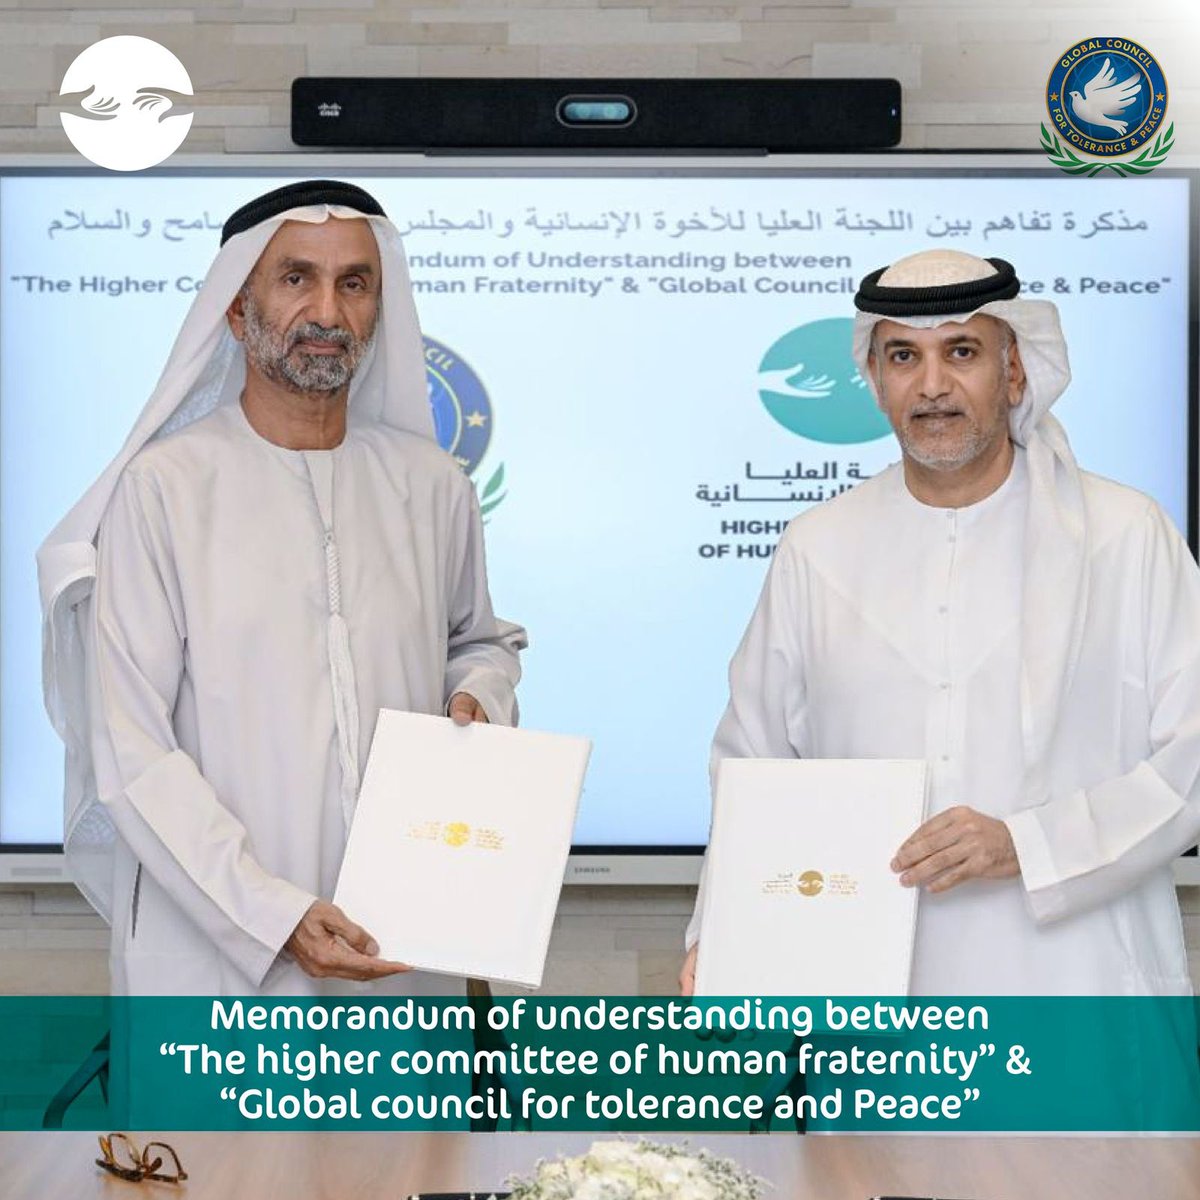 HCHF Secretary-General Dr. Khaled Al-Ghaith and President of the Global Council for Tolerance and Peace H.E. Ahmed Al-Jarwan sign a memorandum of understanding to advance collaboration and joint promotion of human fraternity values ​​including tolerance.